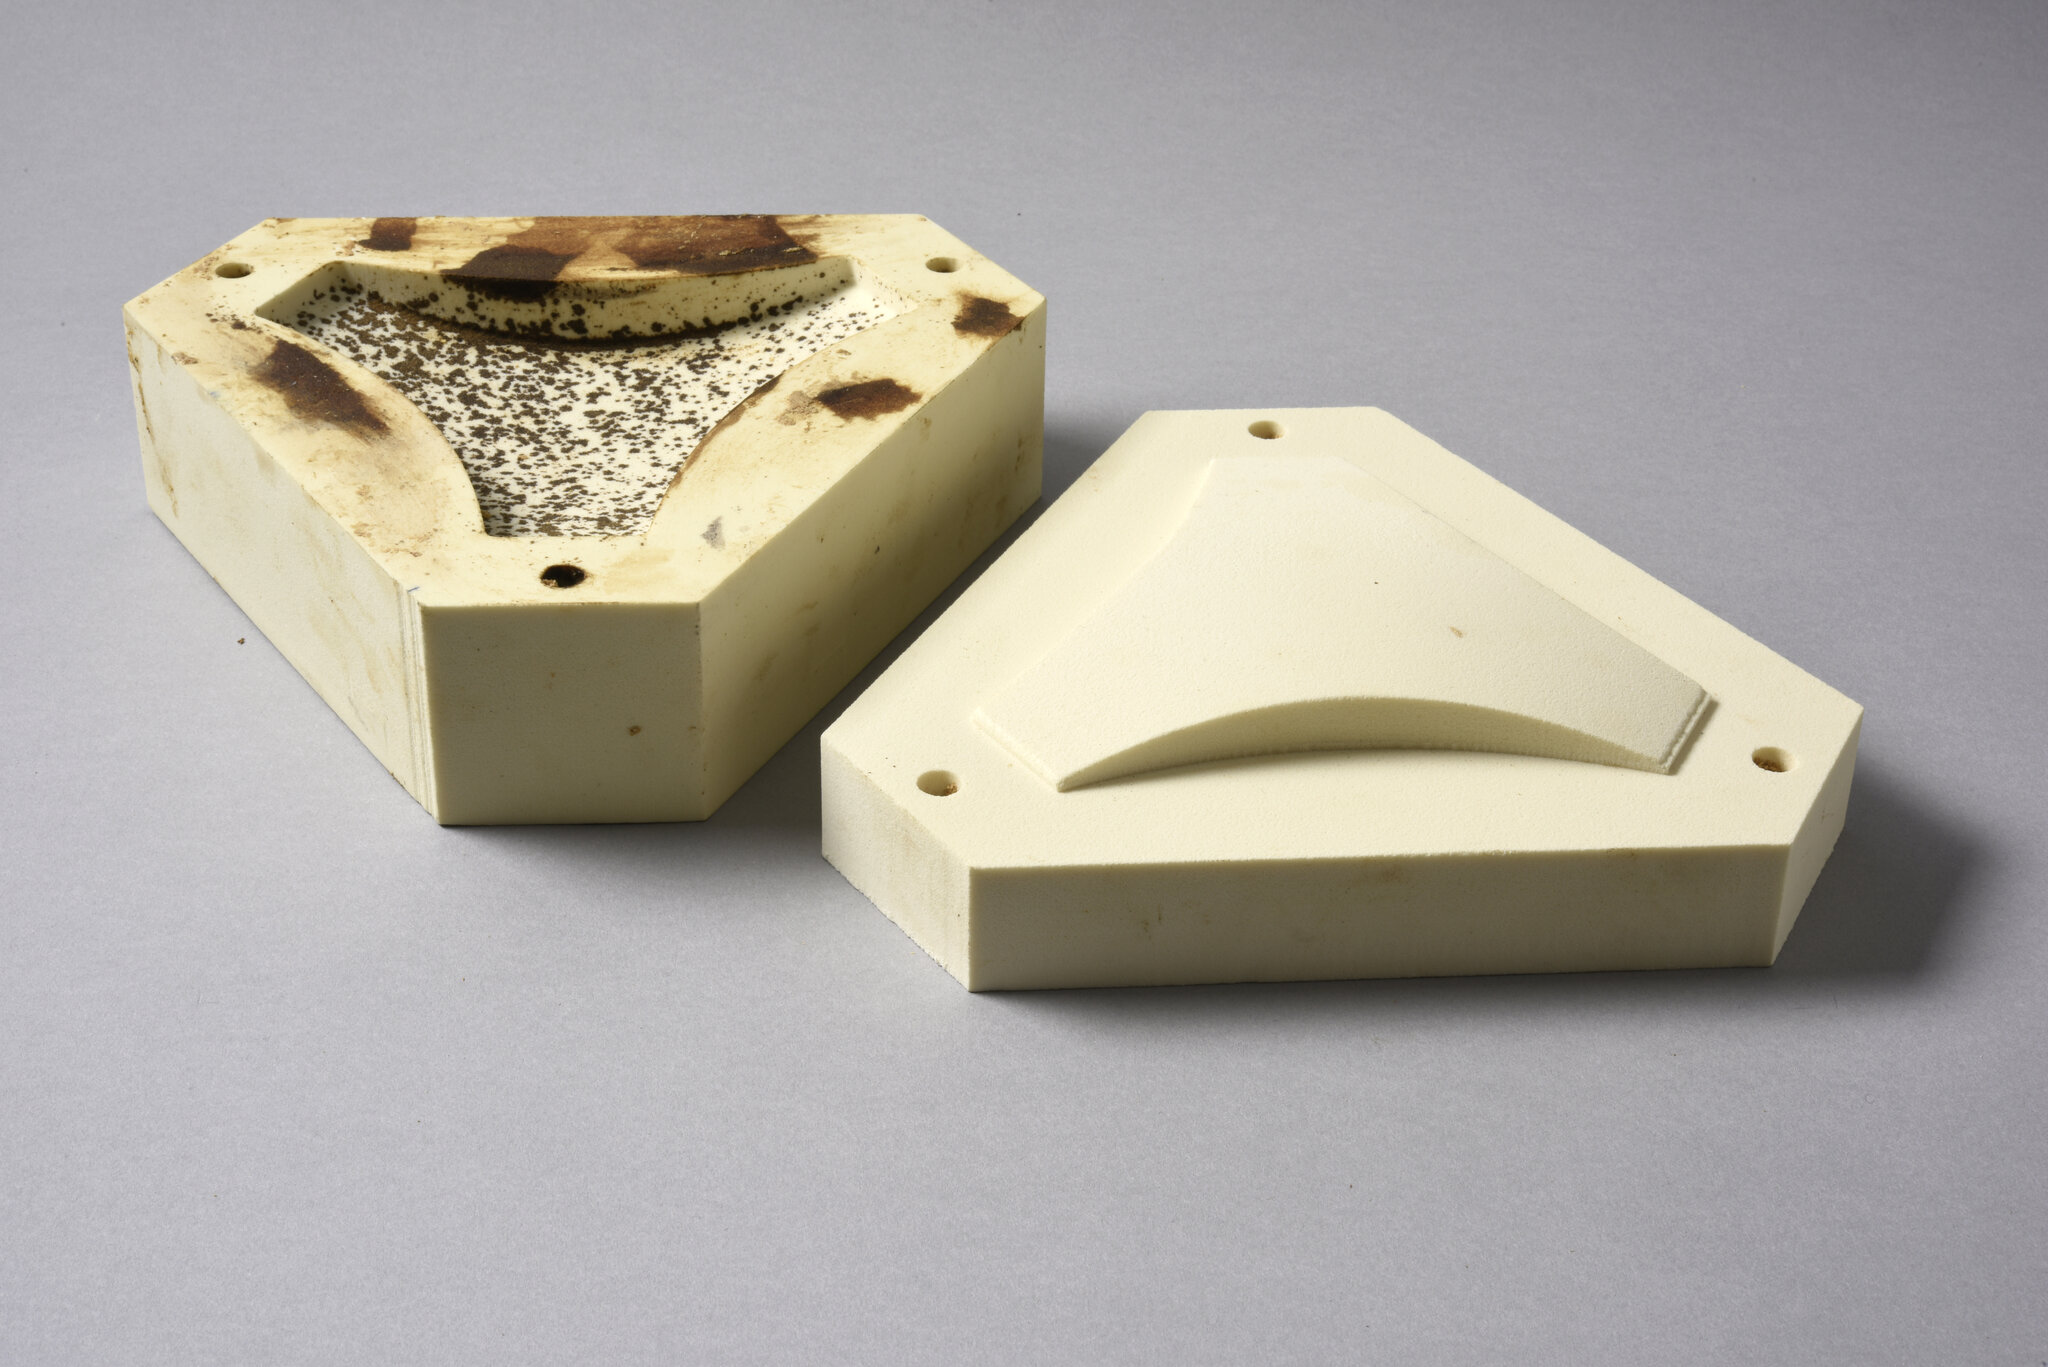 REwoodable – Turning Saw Dust into new shapes